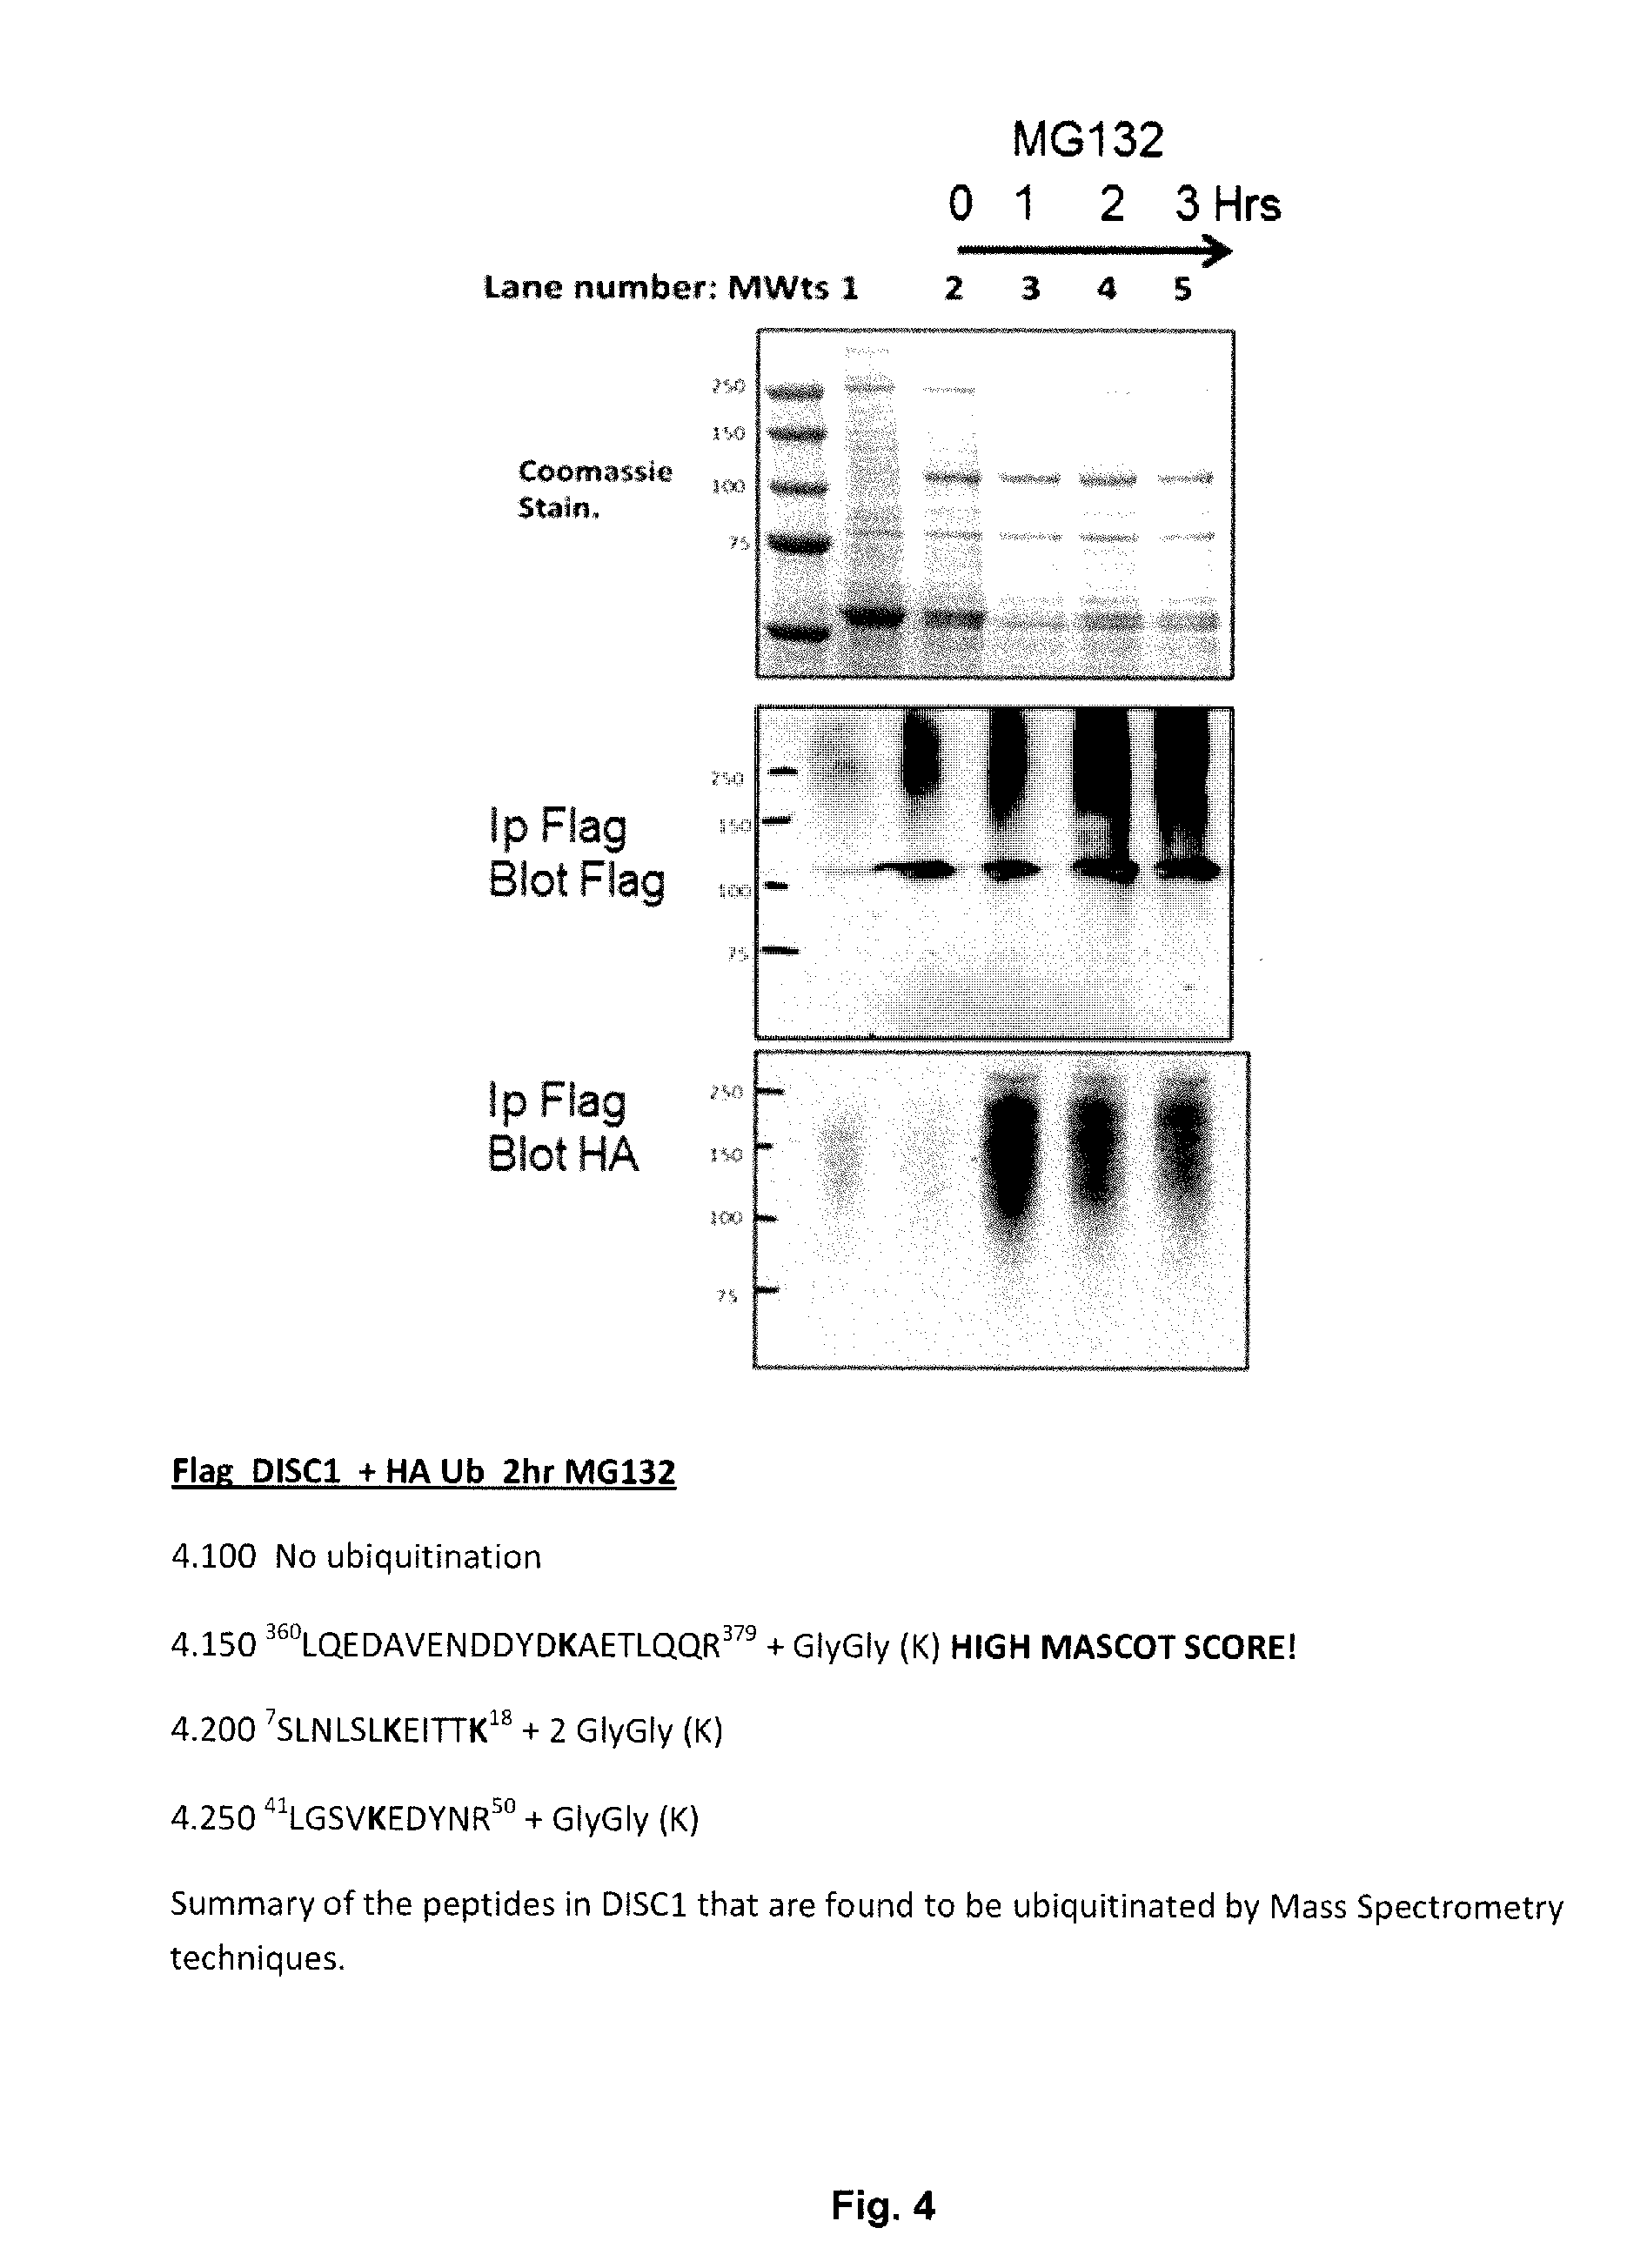 Materials and Methods for Modulating DISC1 Turnover